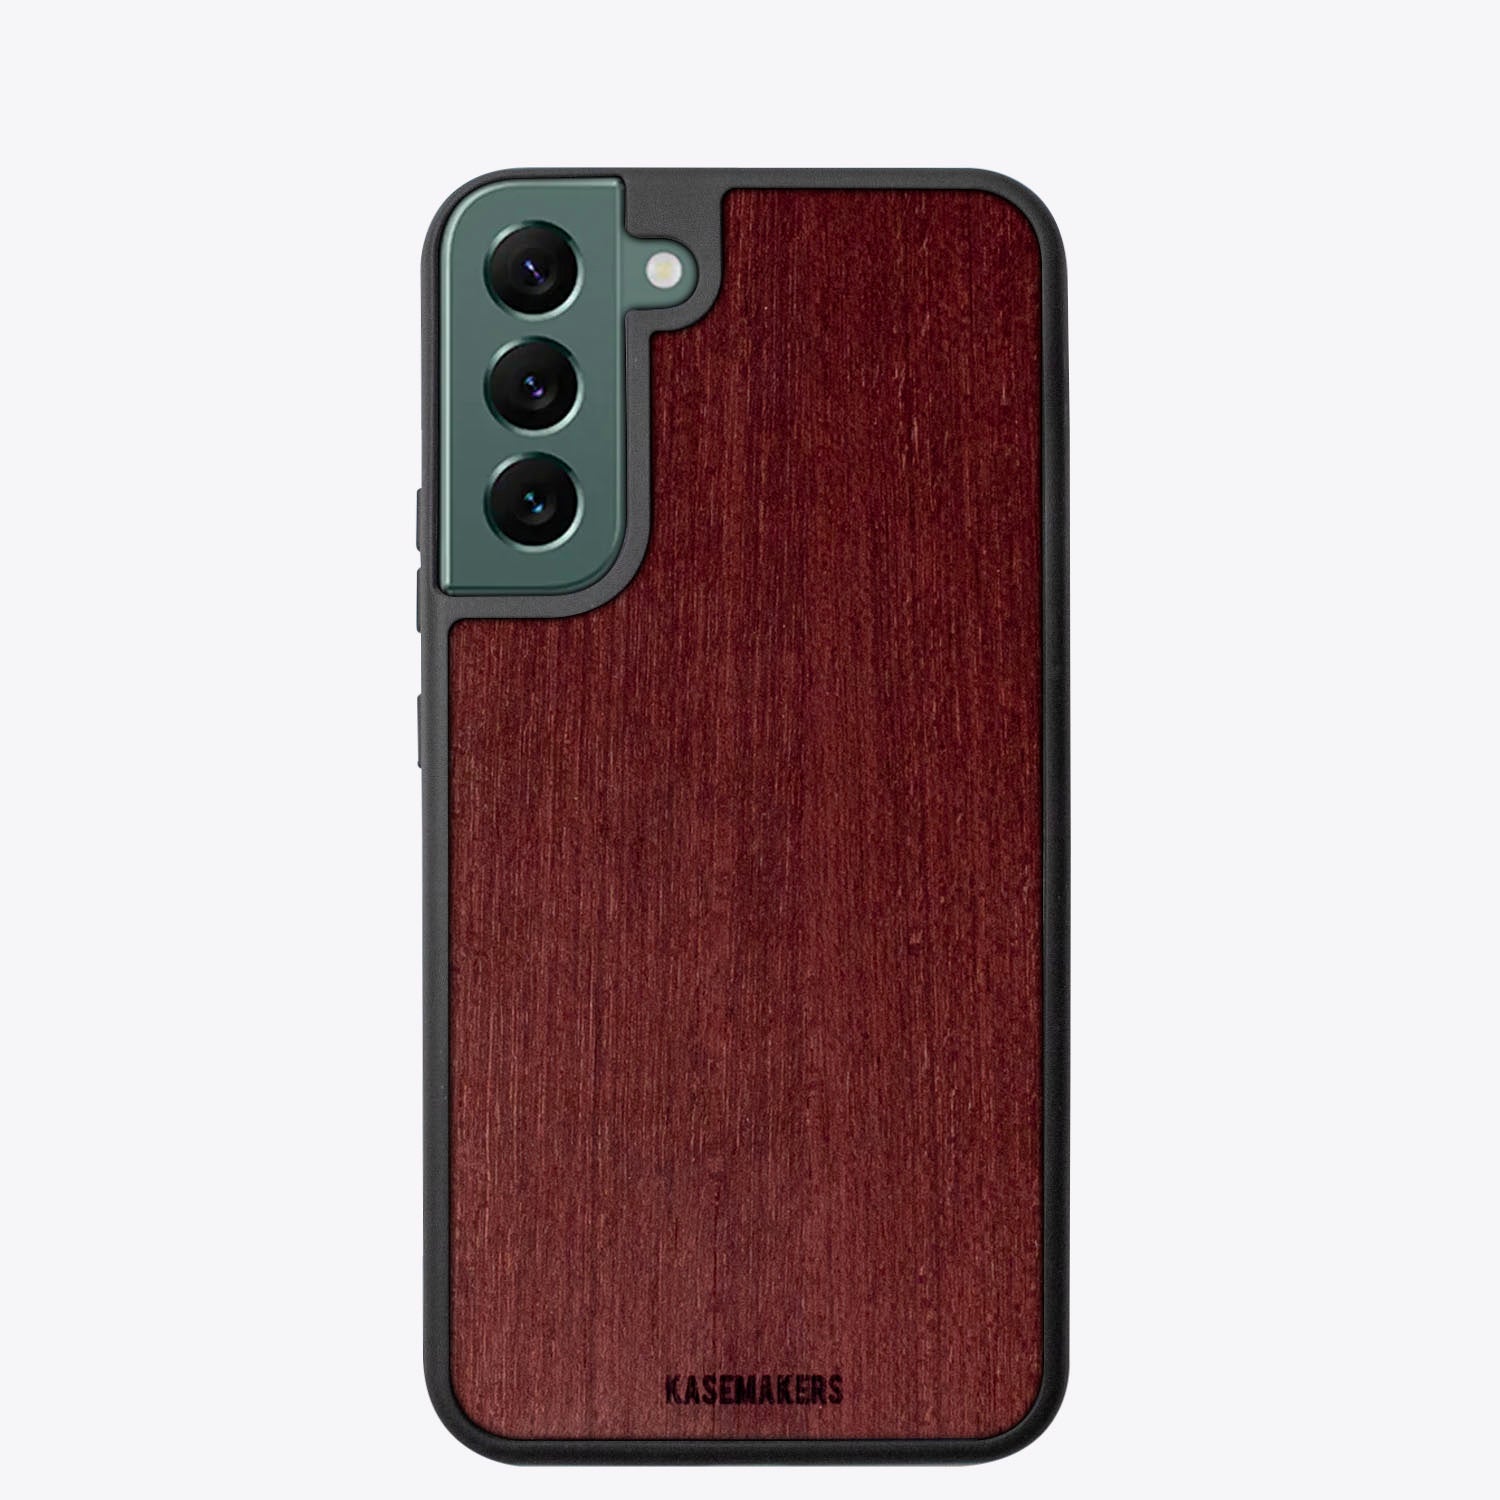 Purpleheart Kase for Samsung Galaxy S22 - Buy One Get One FREE!